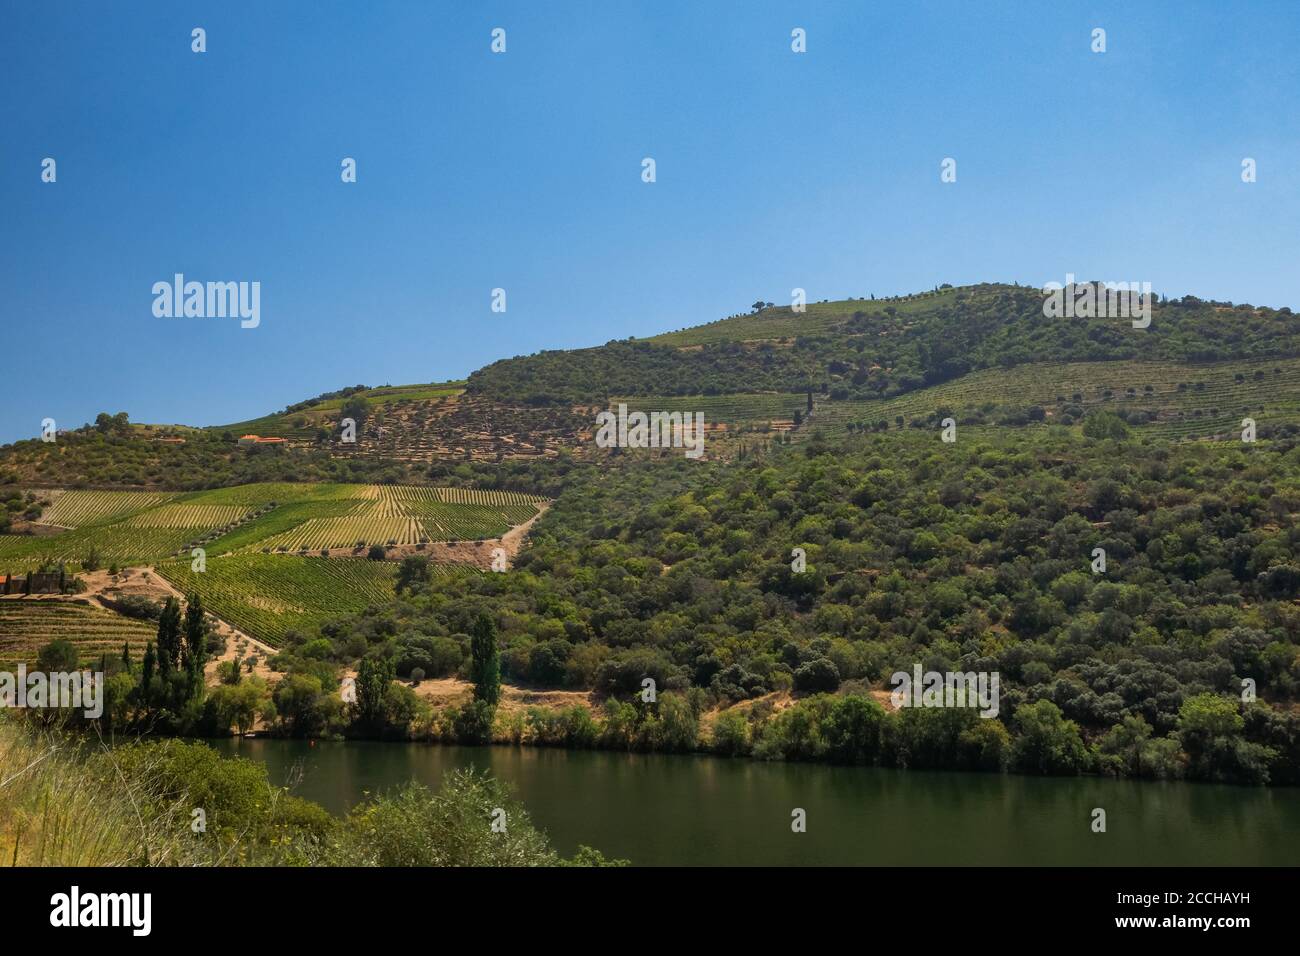 Beautiful Panoramic view of The Valley of the River Douro, Portugal - Port Wine Vineyards Region with Man-made Terraces on Green Hills Slopes Stock Photo